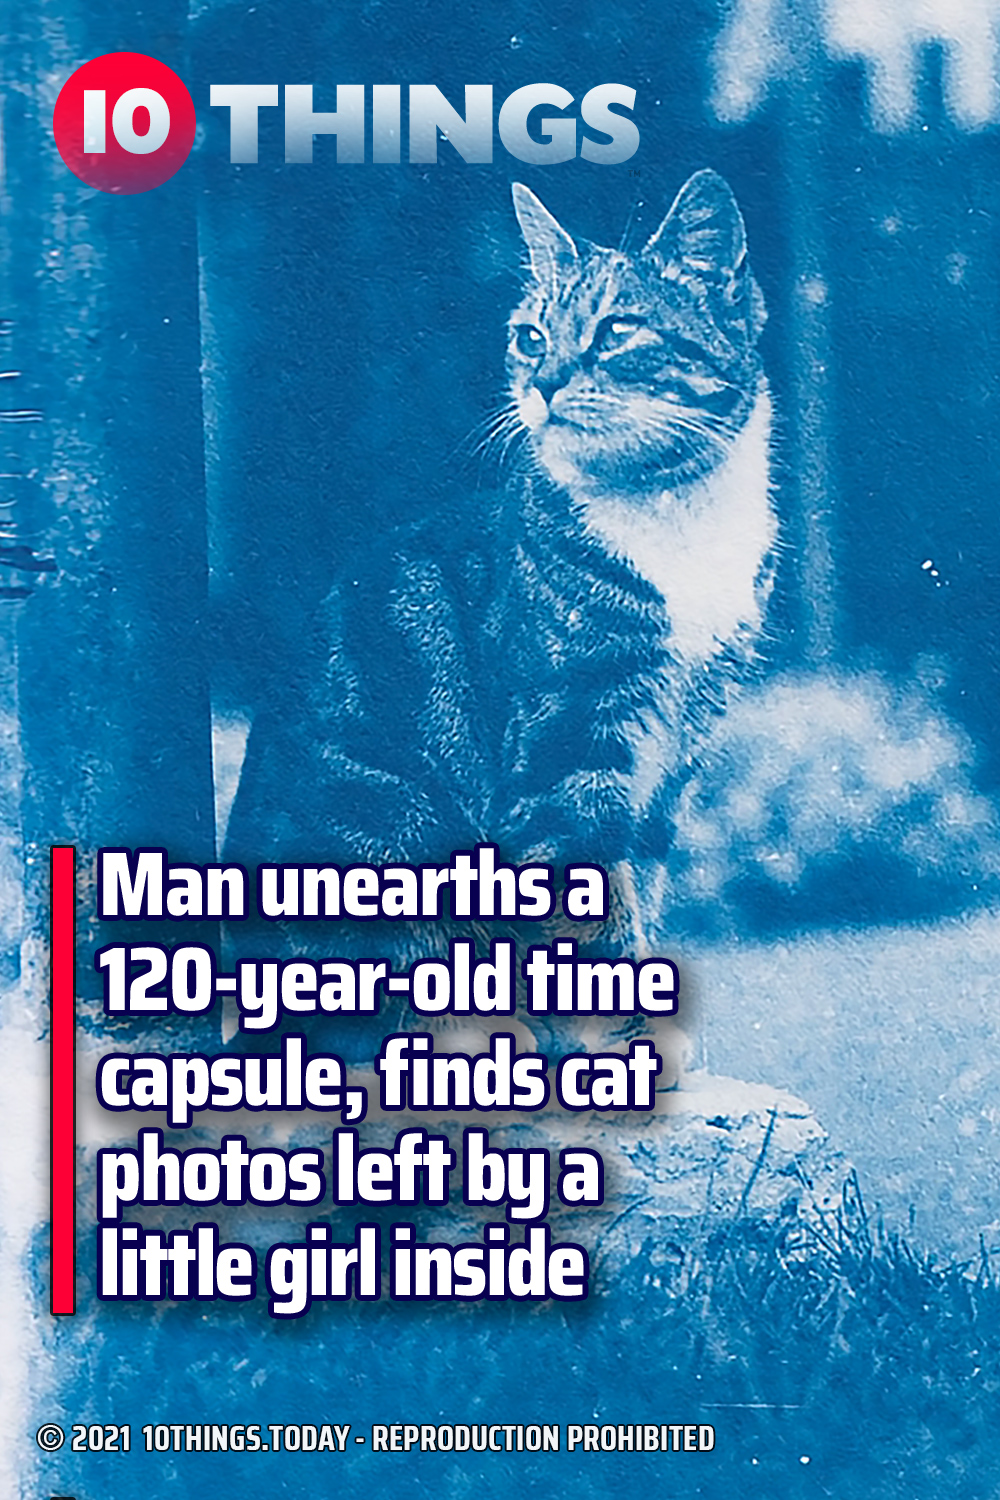 Man unearths a 120-year-old time capsule, finds cat photos left by a little girl inside